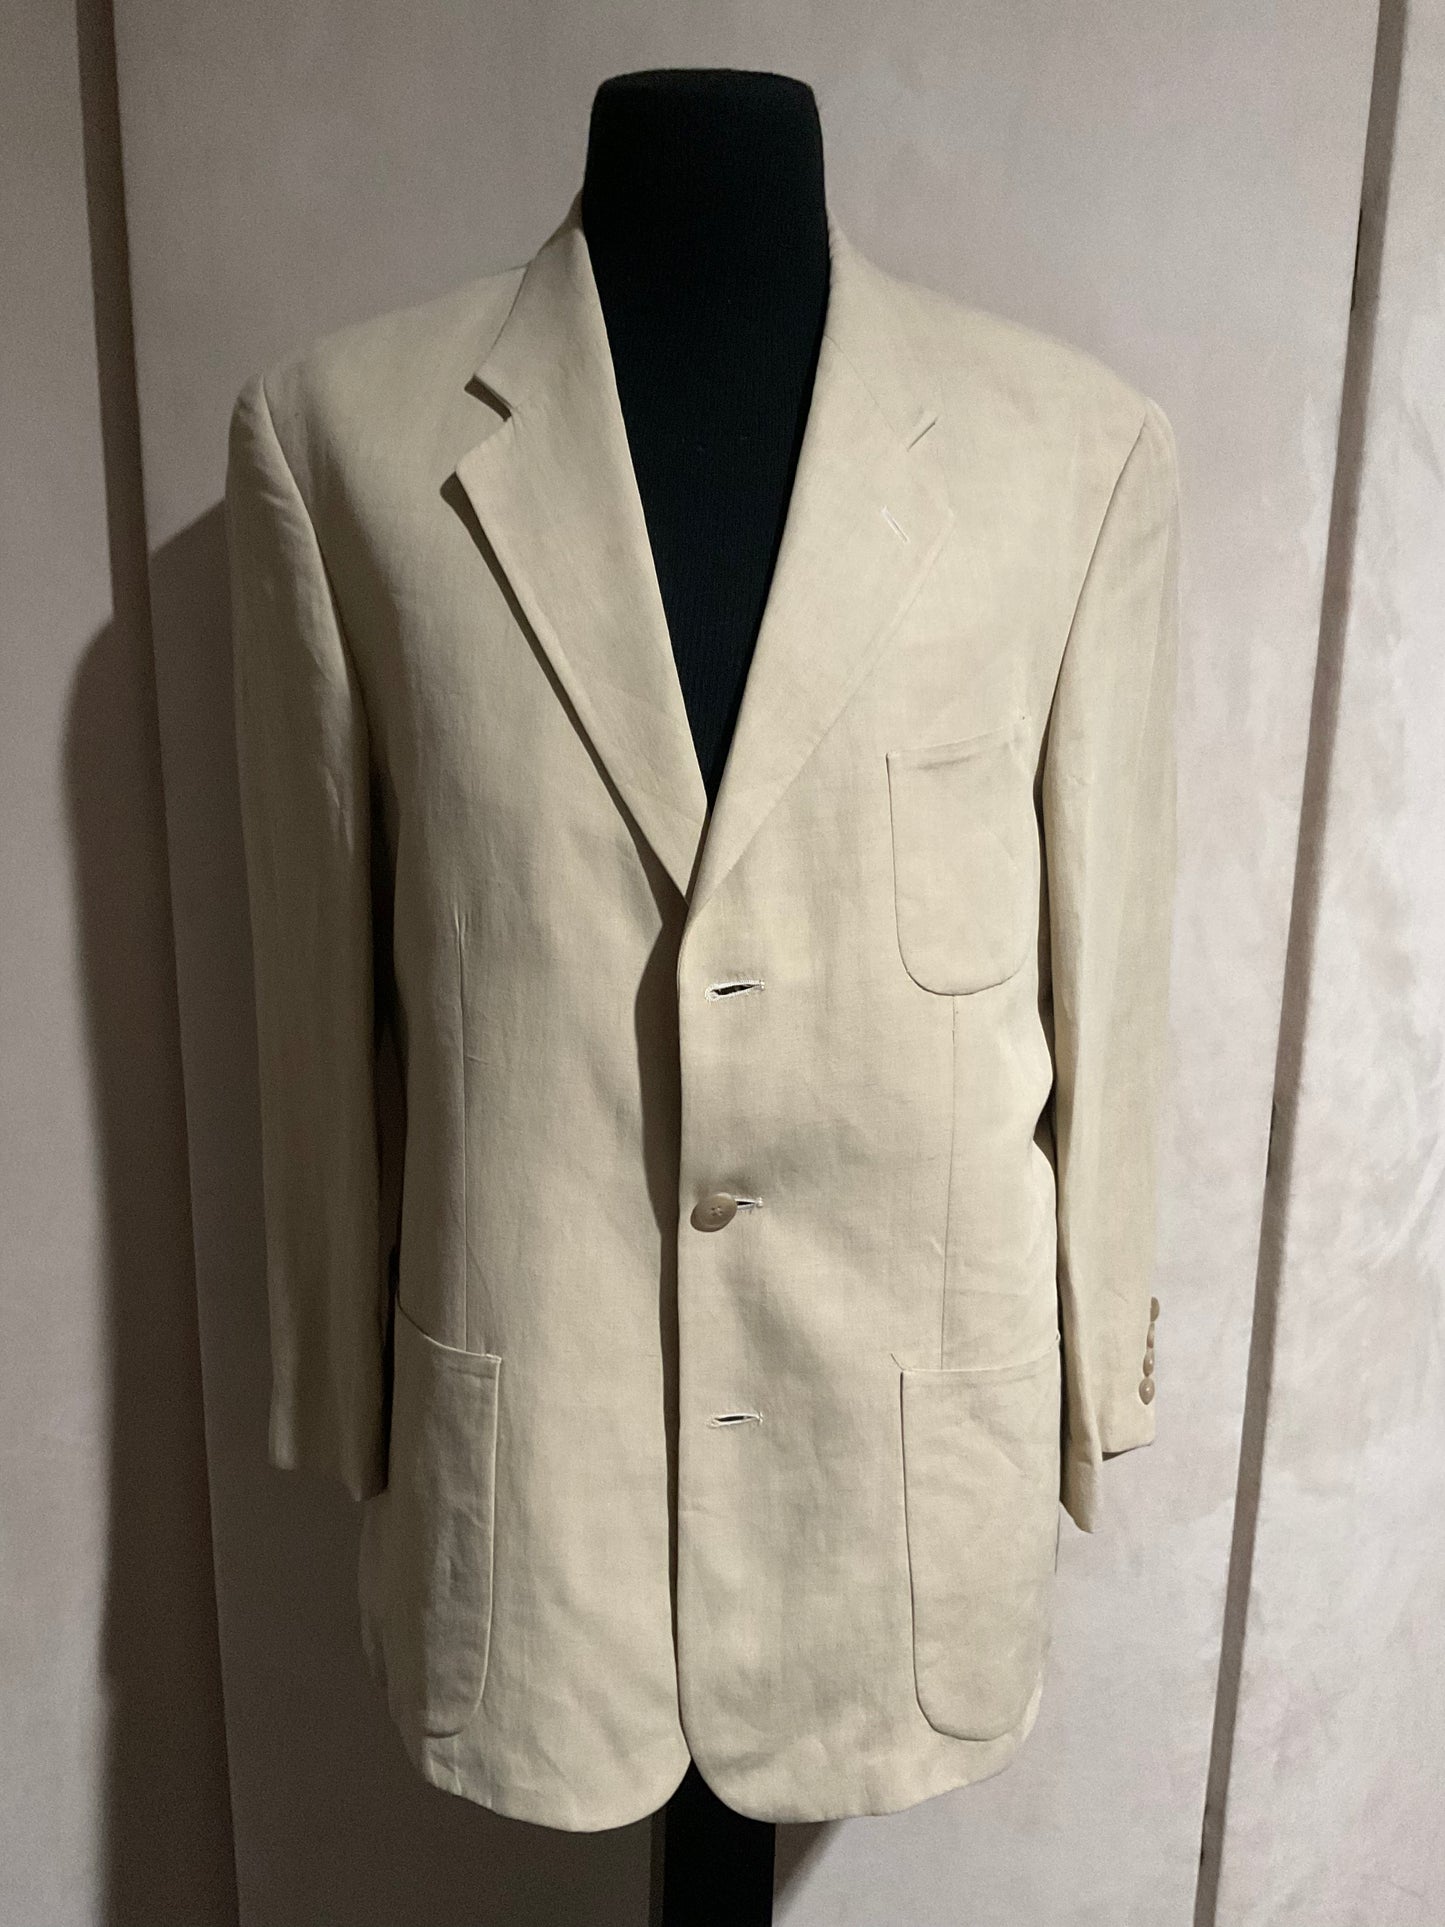 R P SUIT / CAMEL LINEN / 40 REG / MADE IN CANADA